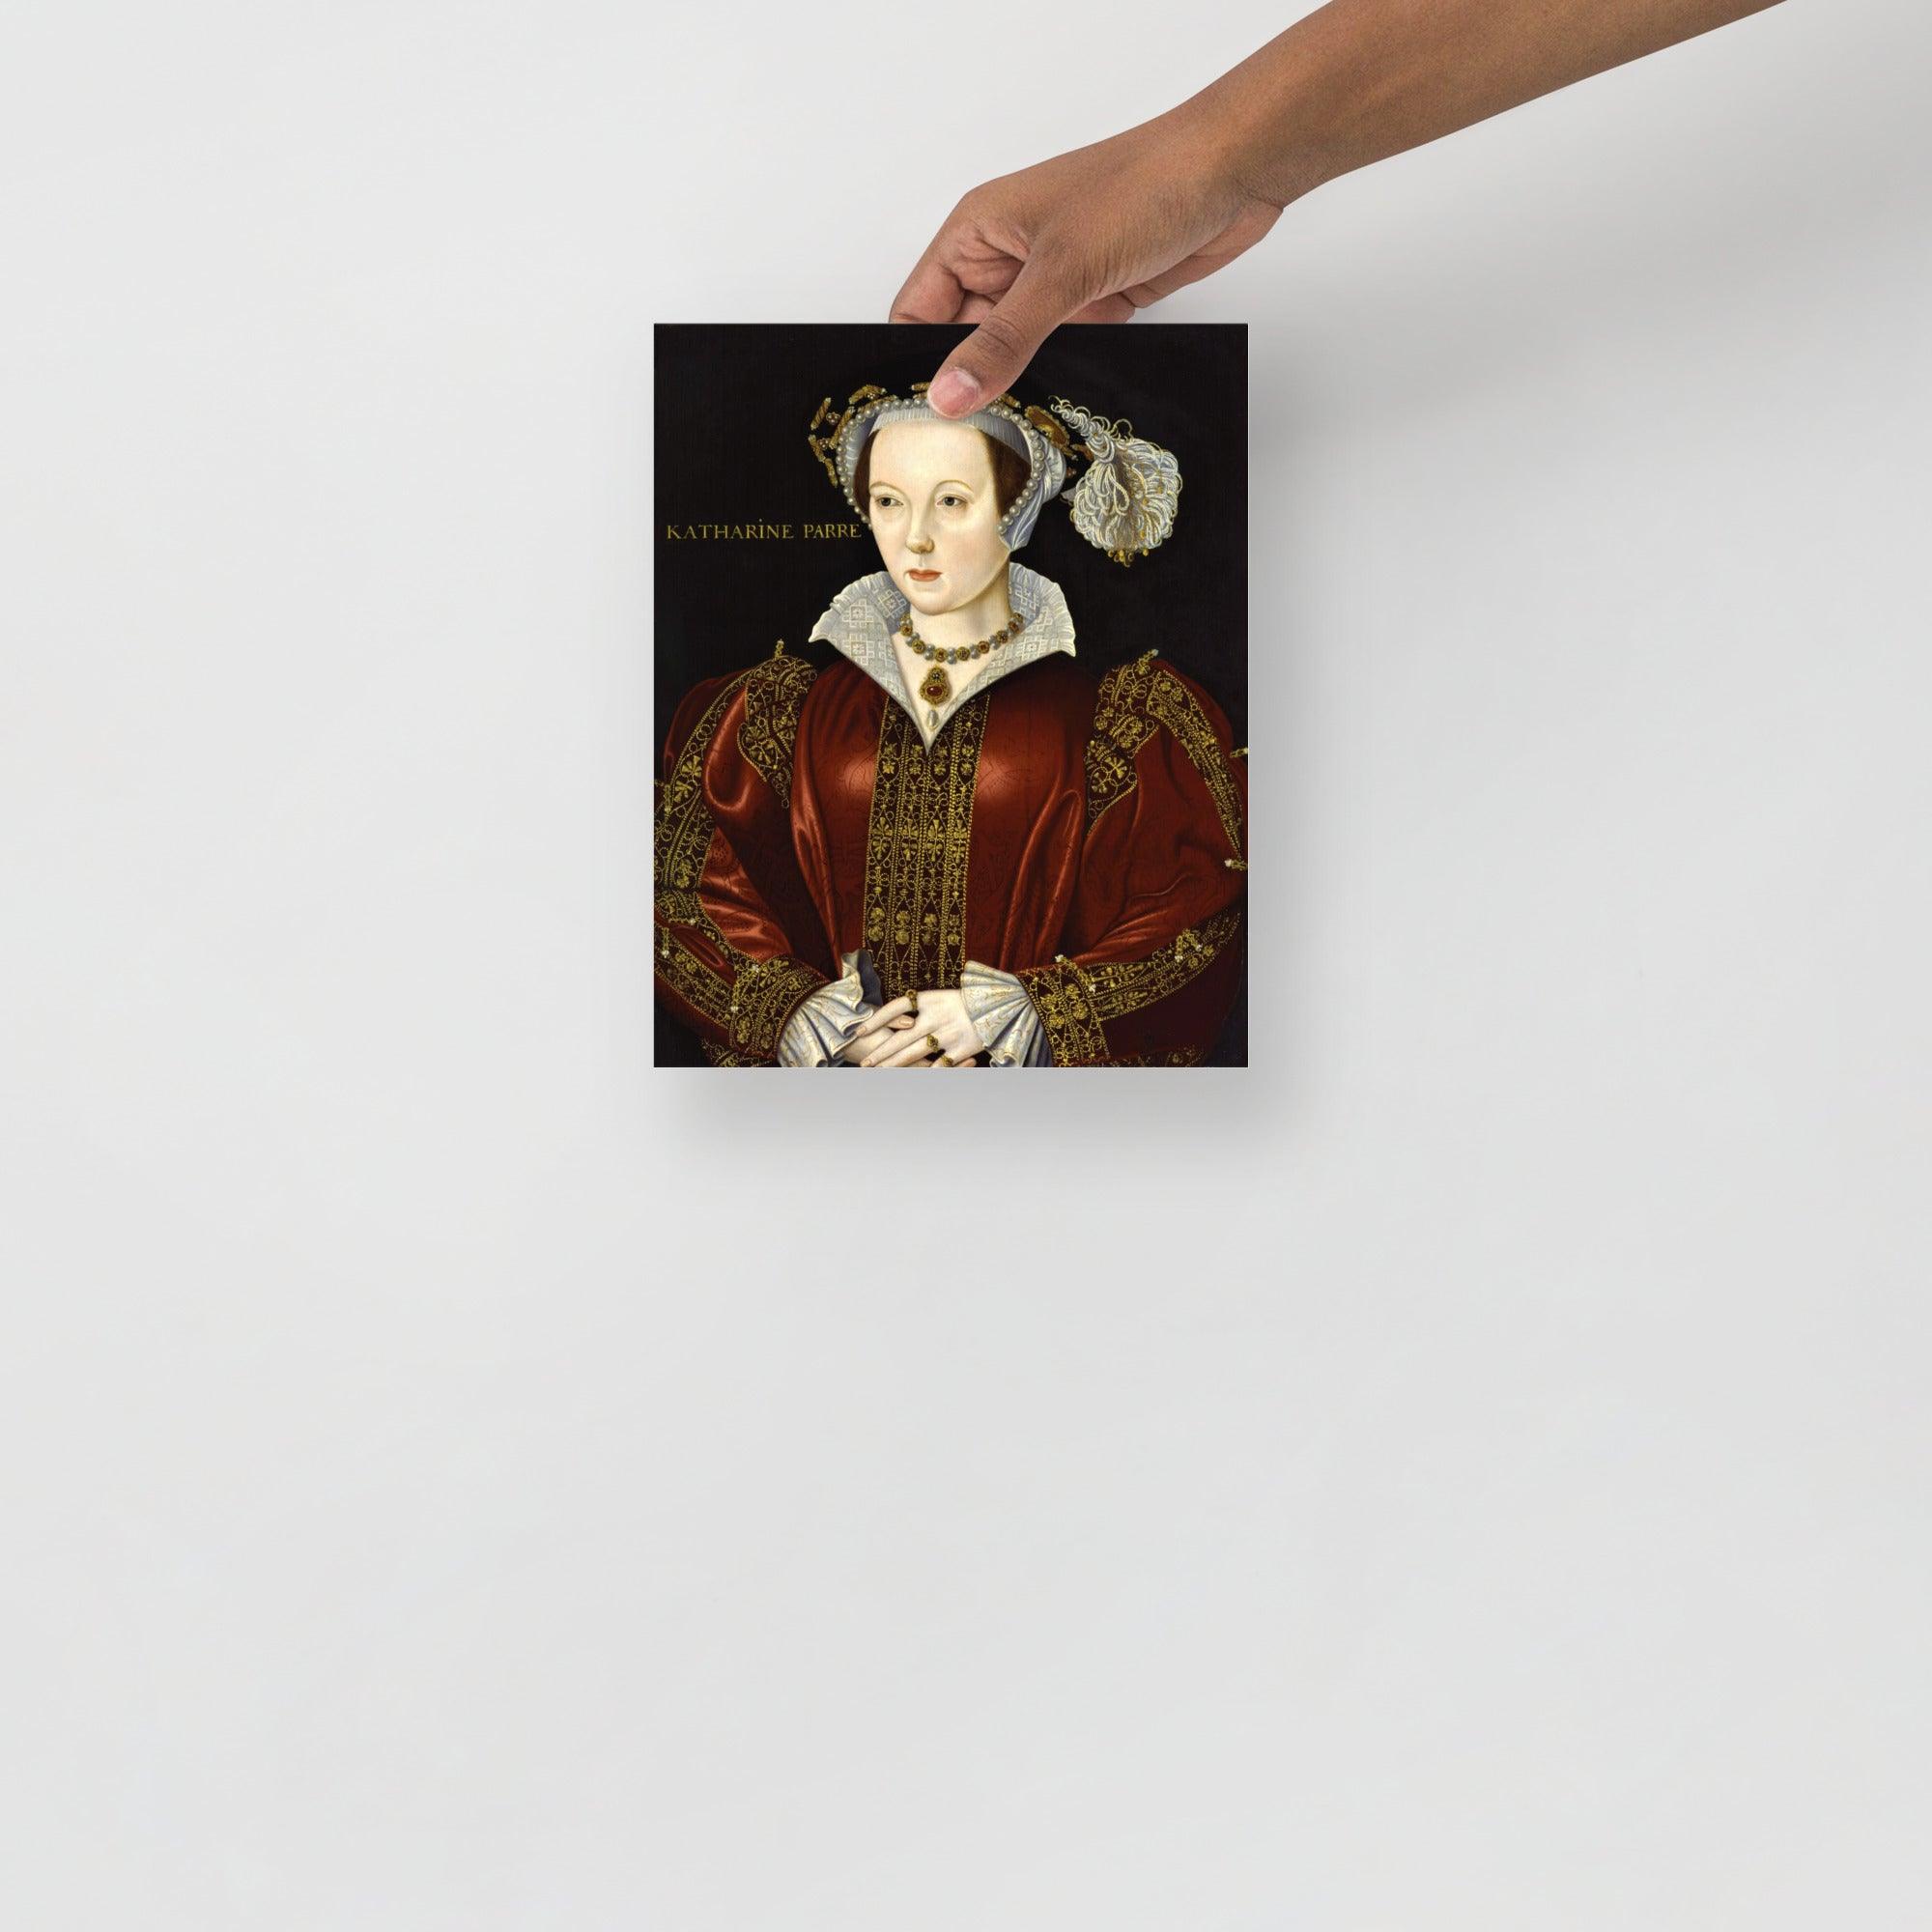 A Catherine Parr poster on a plain backdrop in size 8x10”.